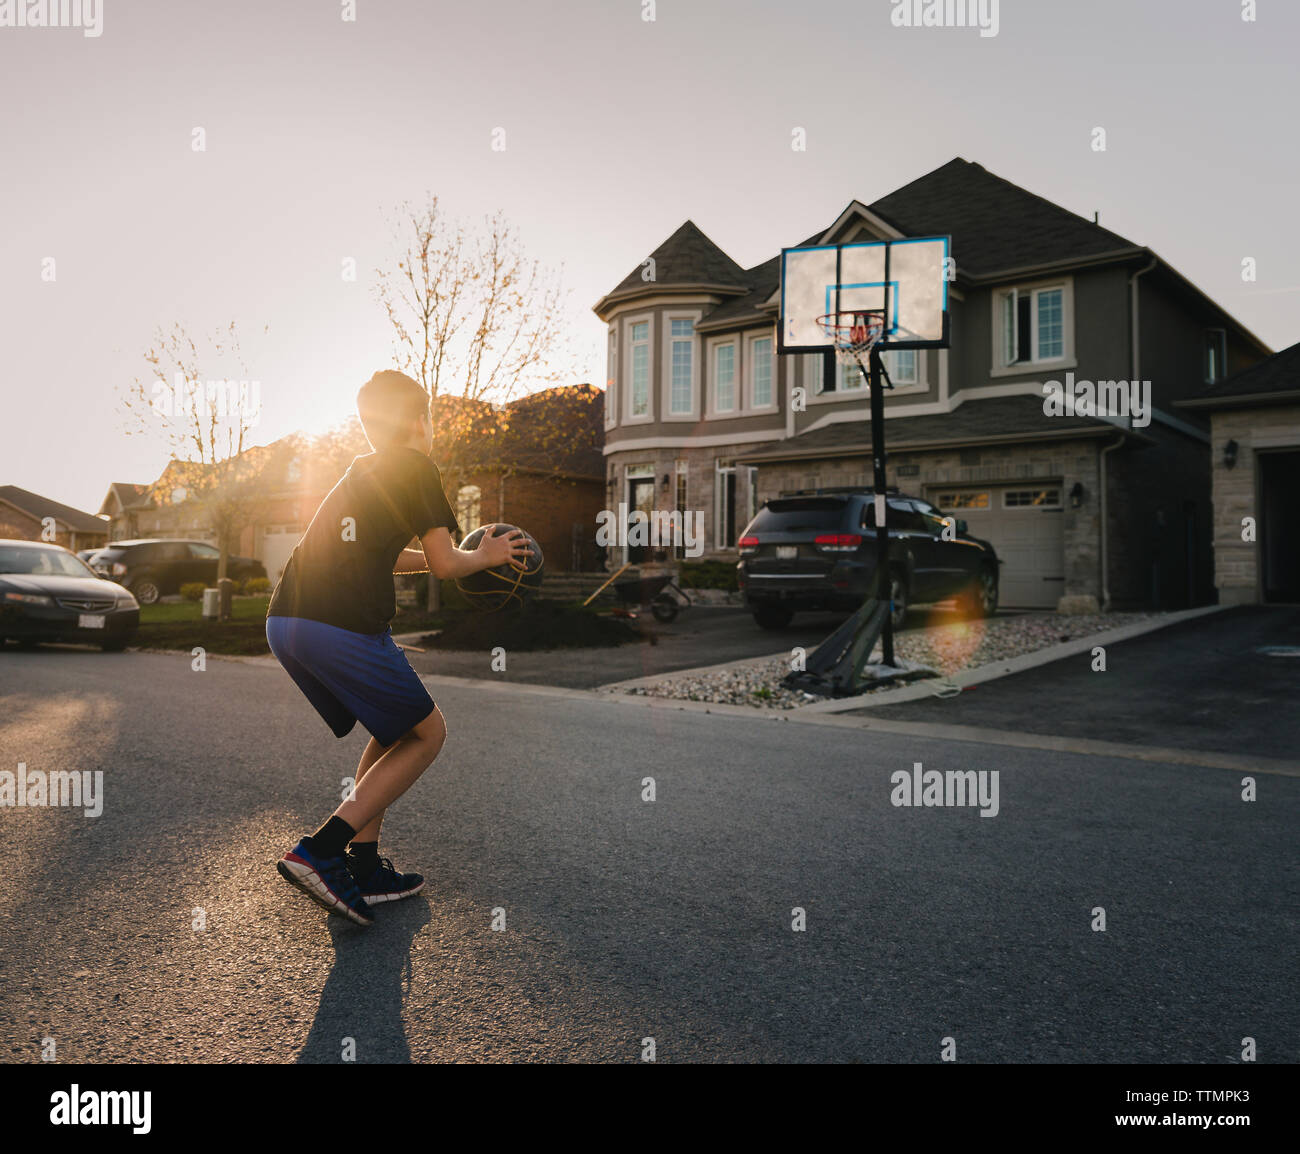 Full length of boy playing basketball on road during sunset Stock Photo